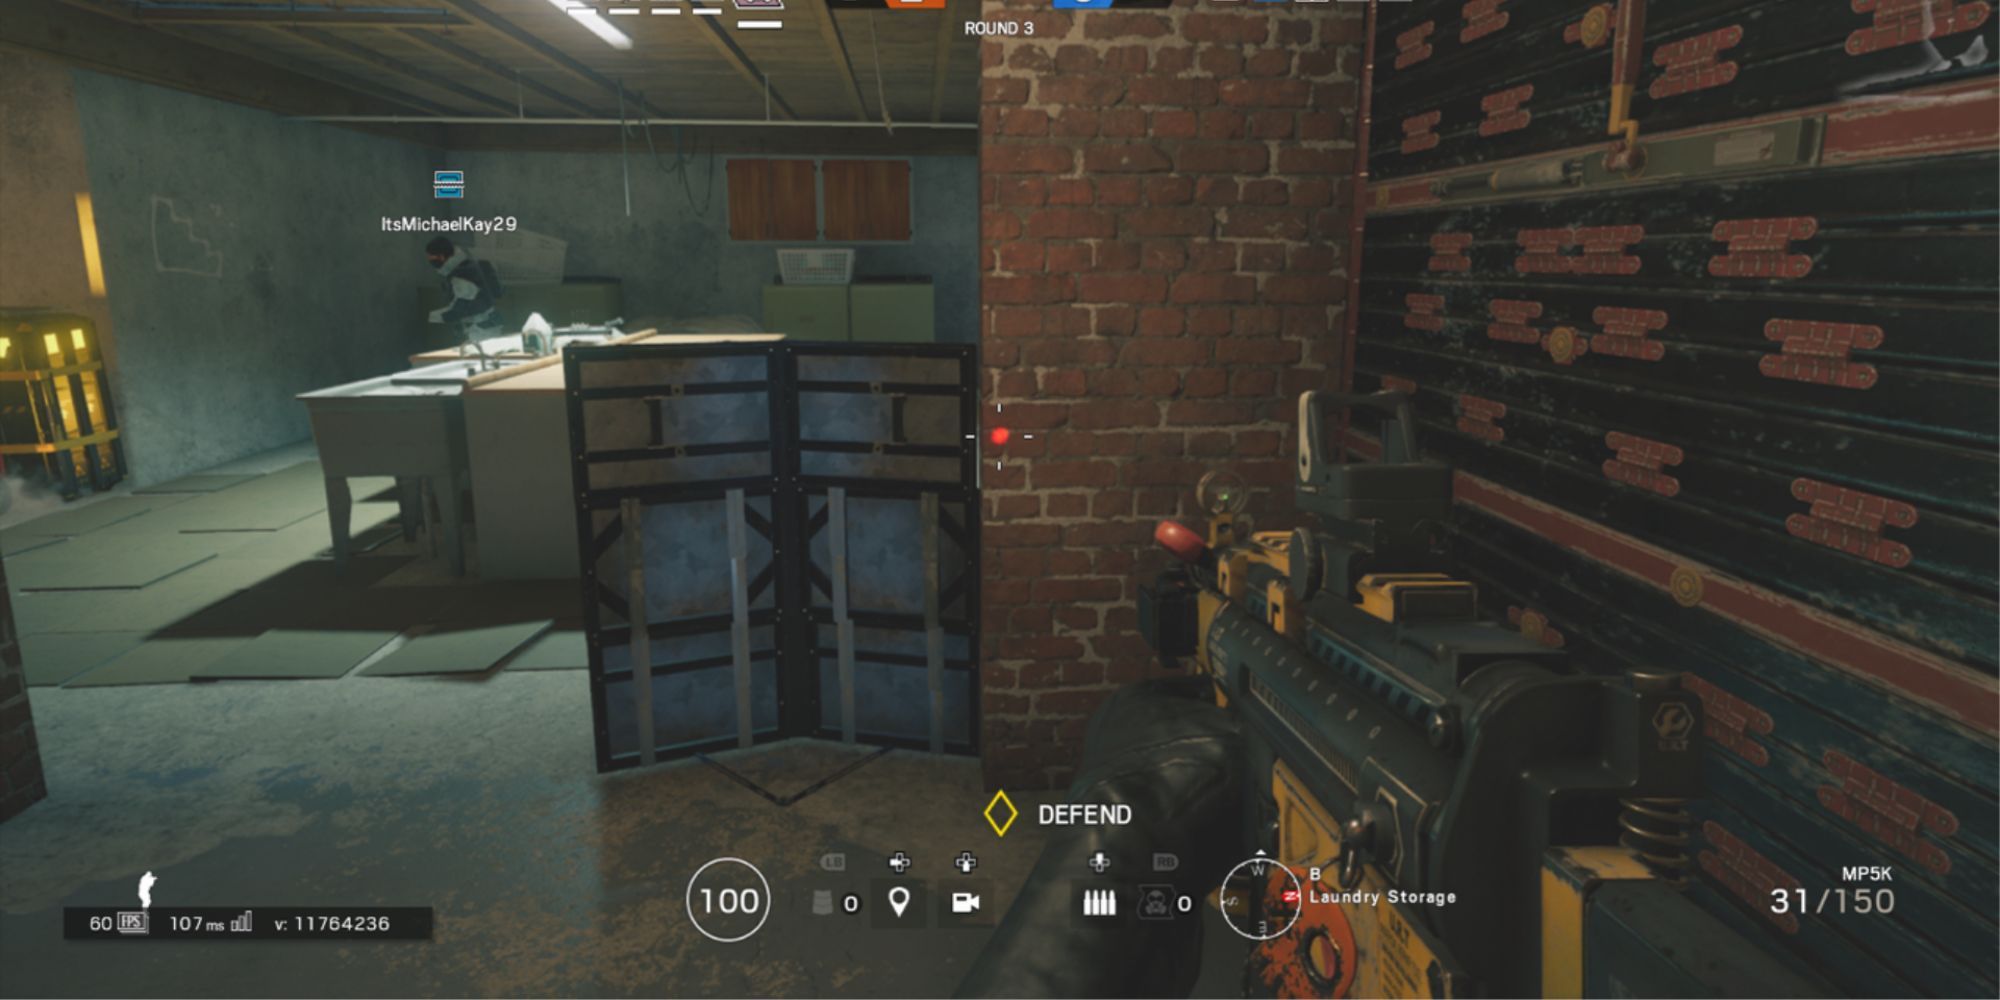 siege_deployable shield that is set up